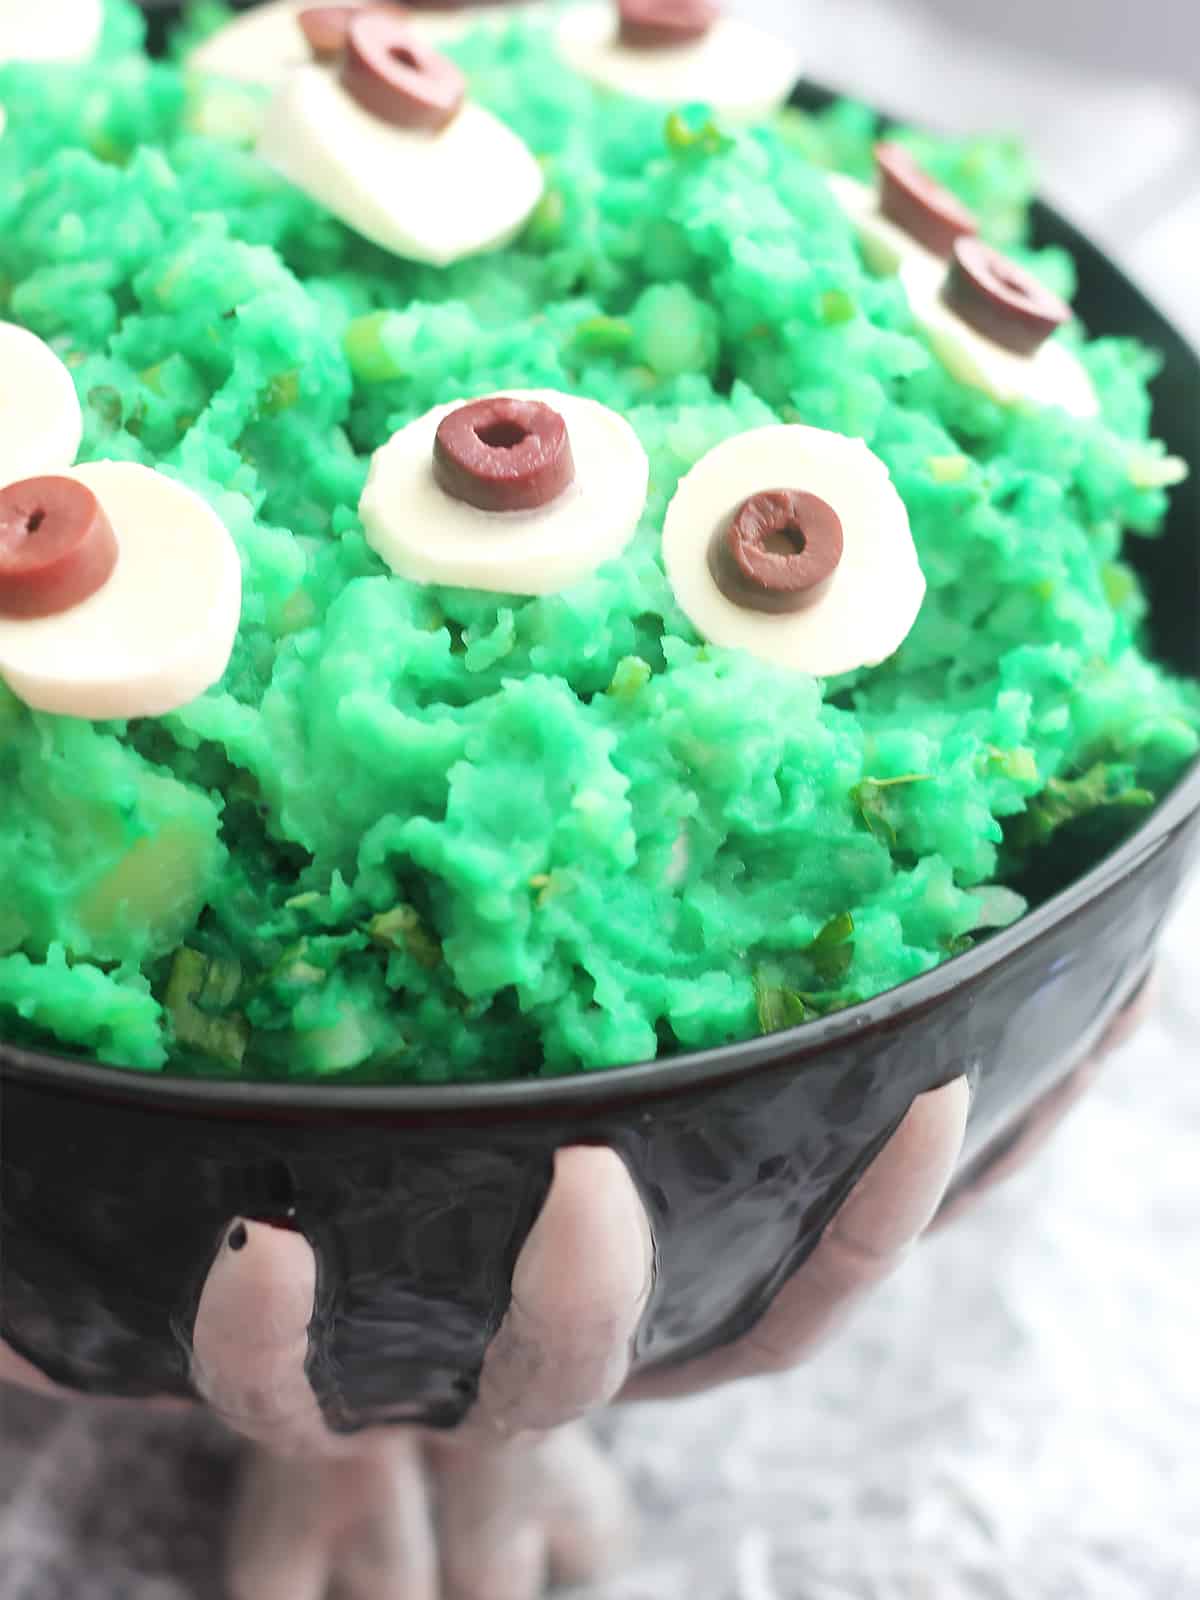 Green mashed potato with eyes in a black bowl.